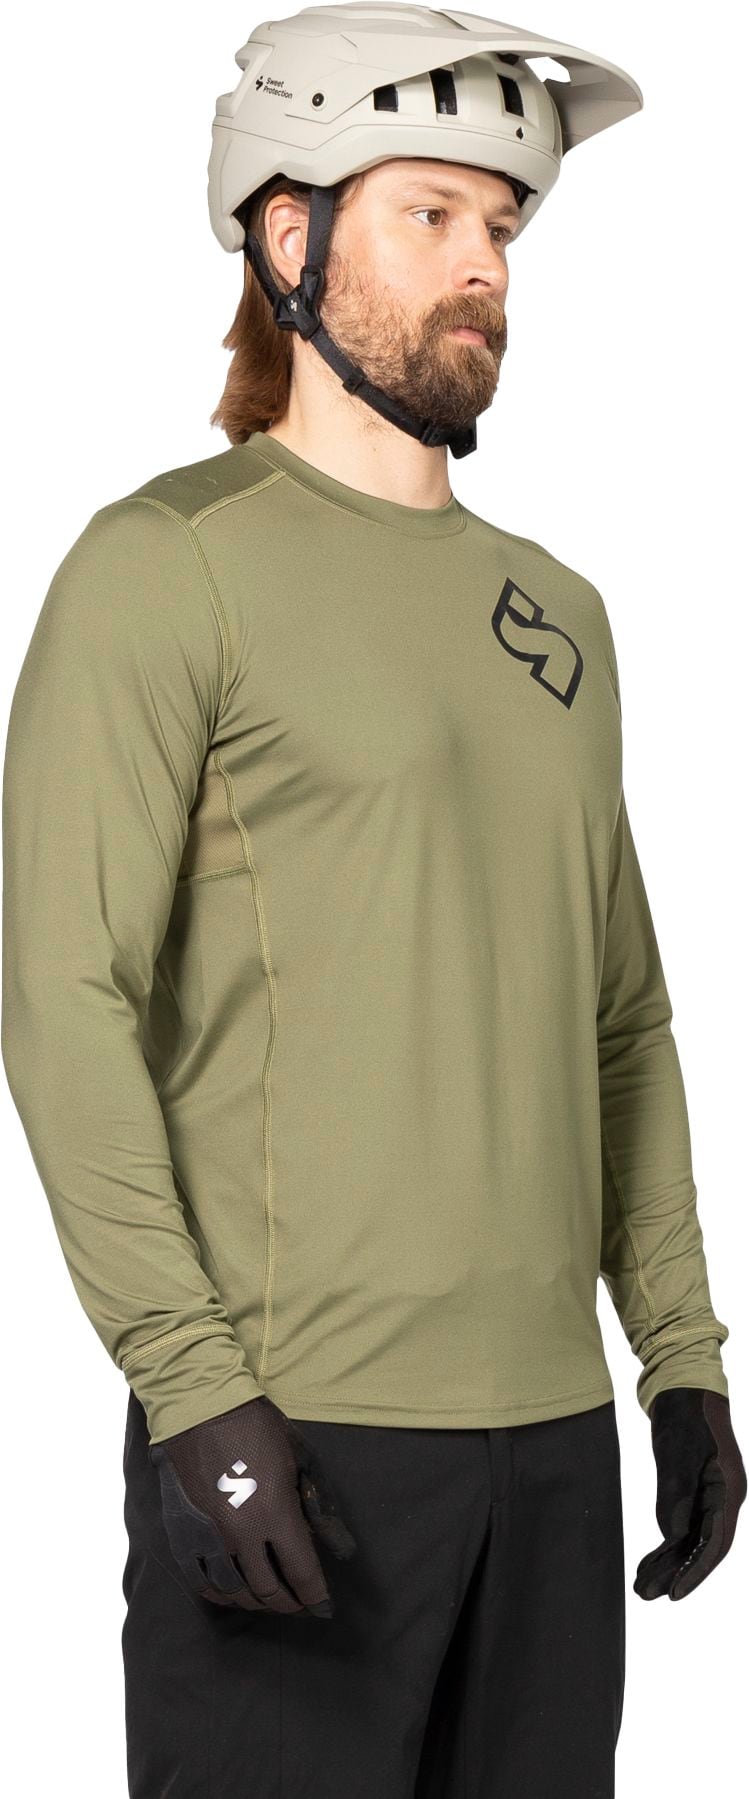 SWEET PROTECTION, M HUNTER LS JERSEY